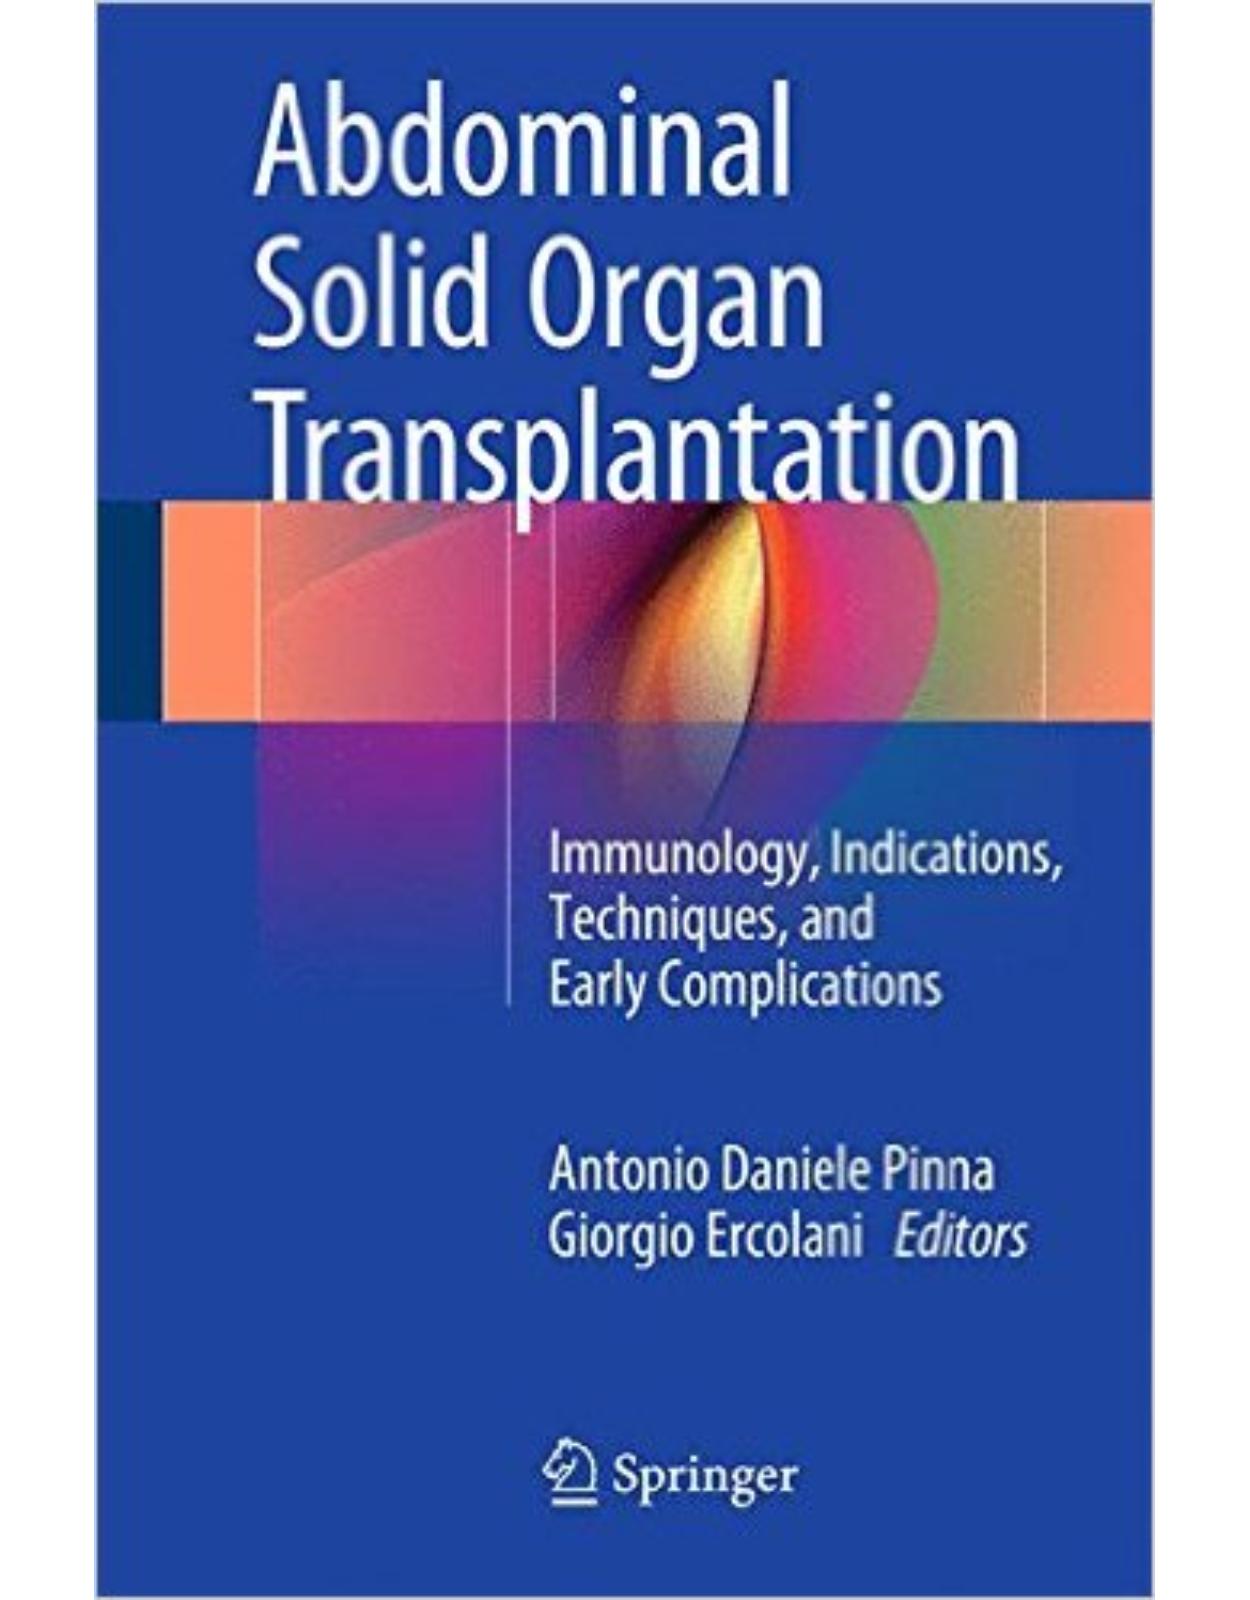 Abdominal Solid Organ Transplantation: Immunology, Indications, Techniques, and Early Complications 1st ed. 2015 Edition